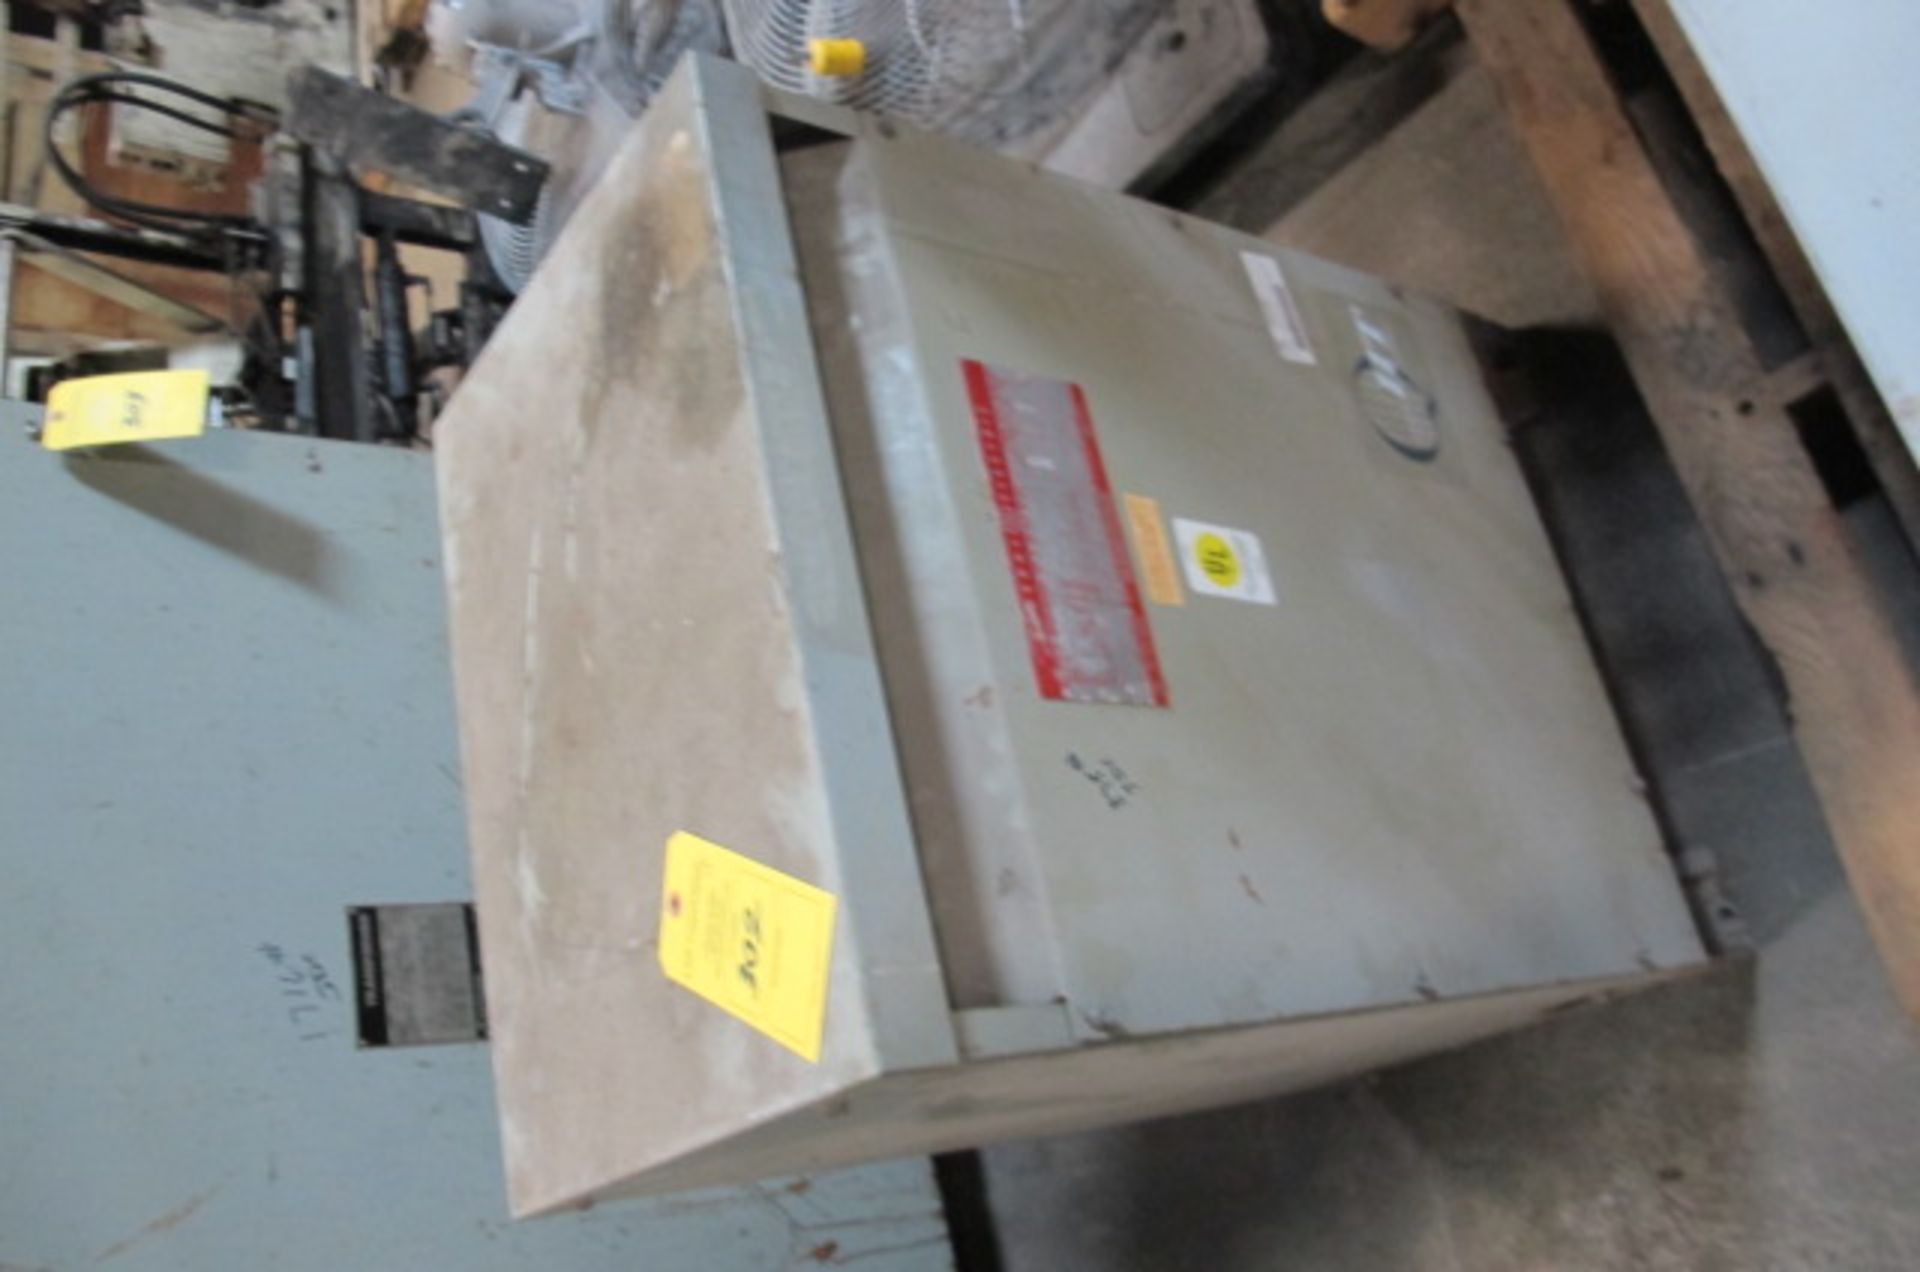 GE TRANSFORMER 45KVA 7650 OH 120, Lyons, Ohio 43523 - all Gaylord plastic pallets are NOT included